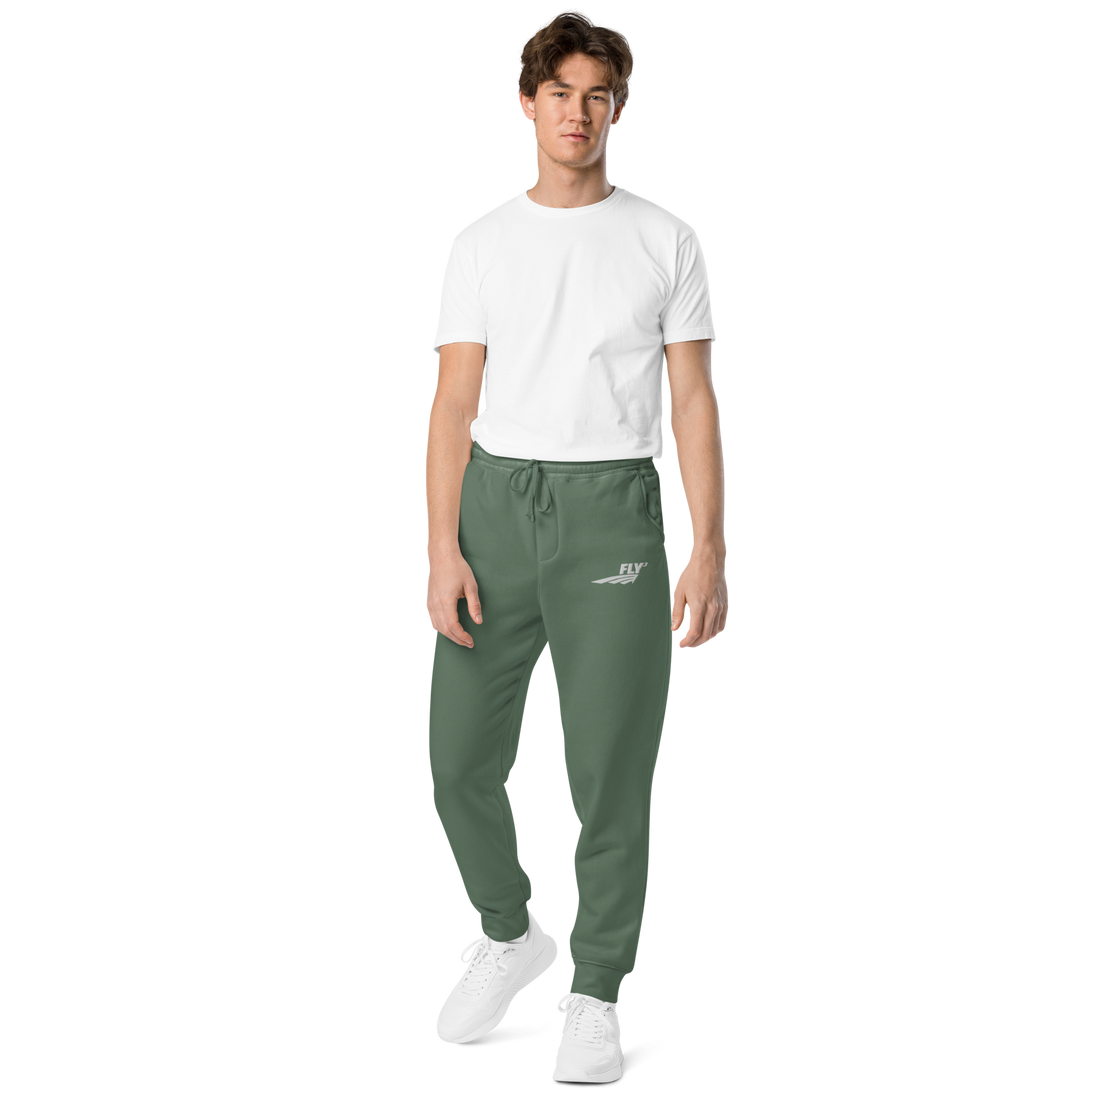 FLY³ pigment-dyed sweatpants | Flycube